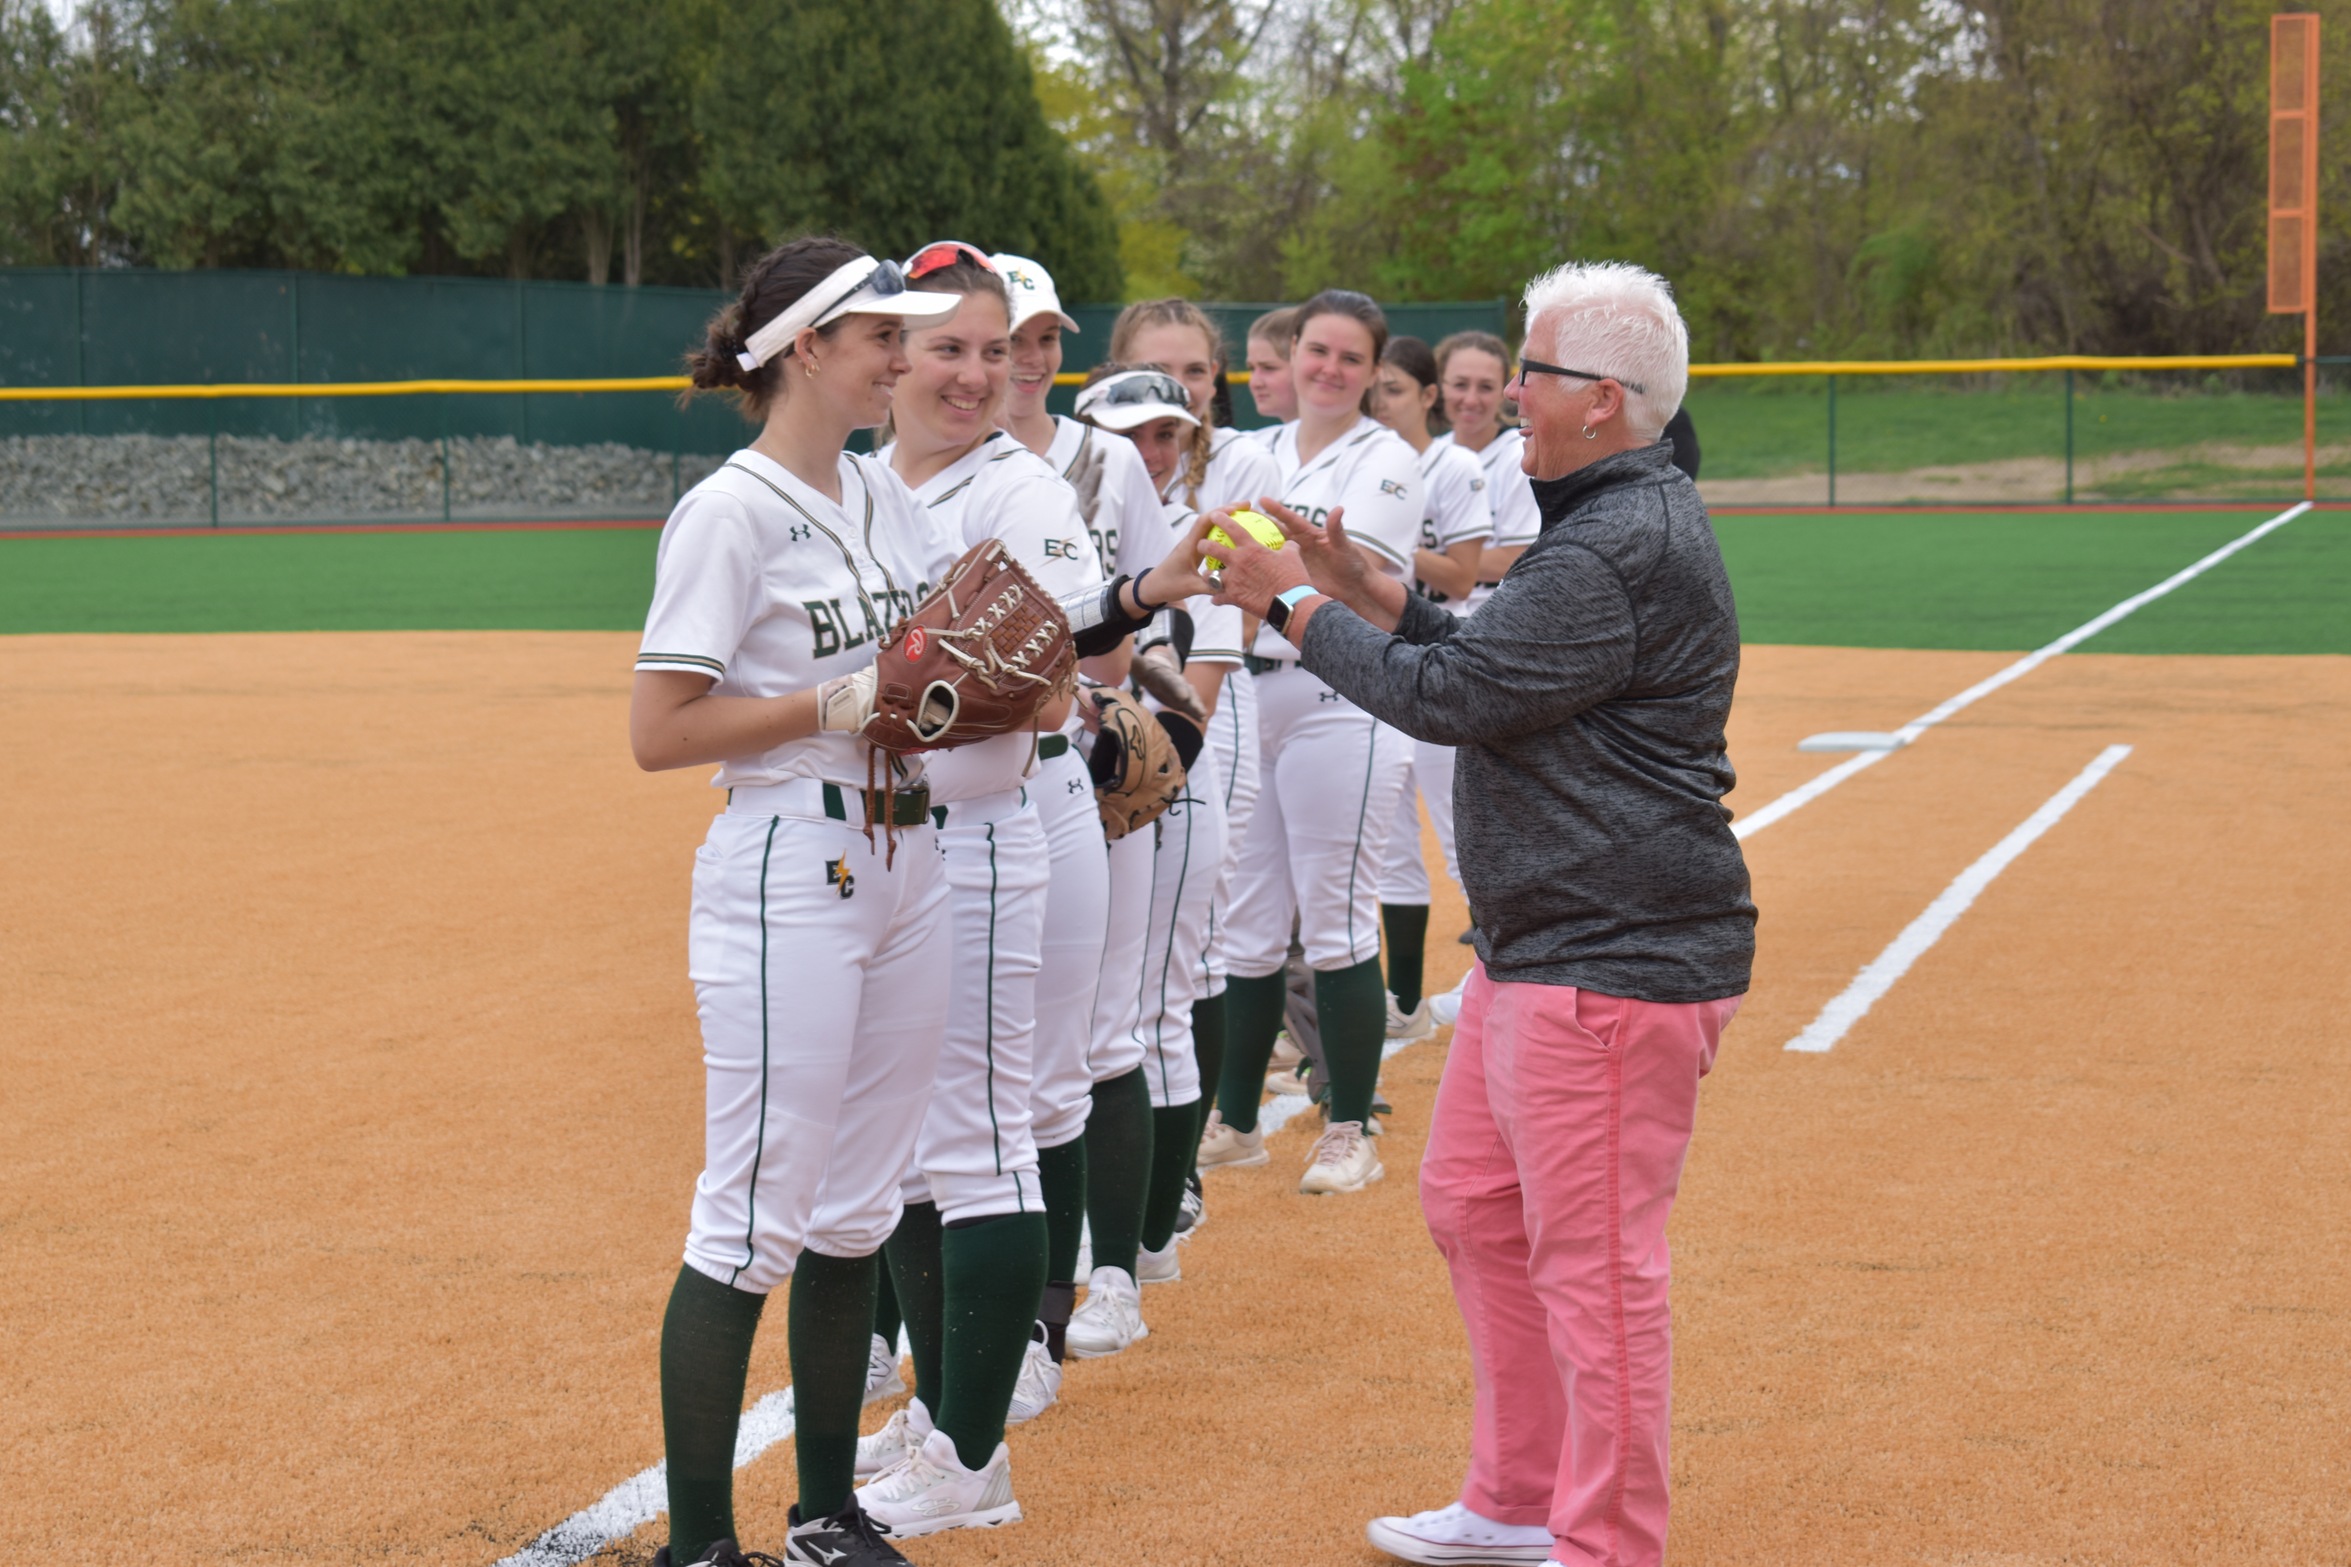 Cheryl R. Condon Throws out the First Pitch on Newly Renovated Field